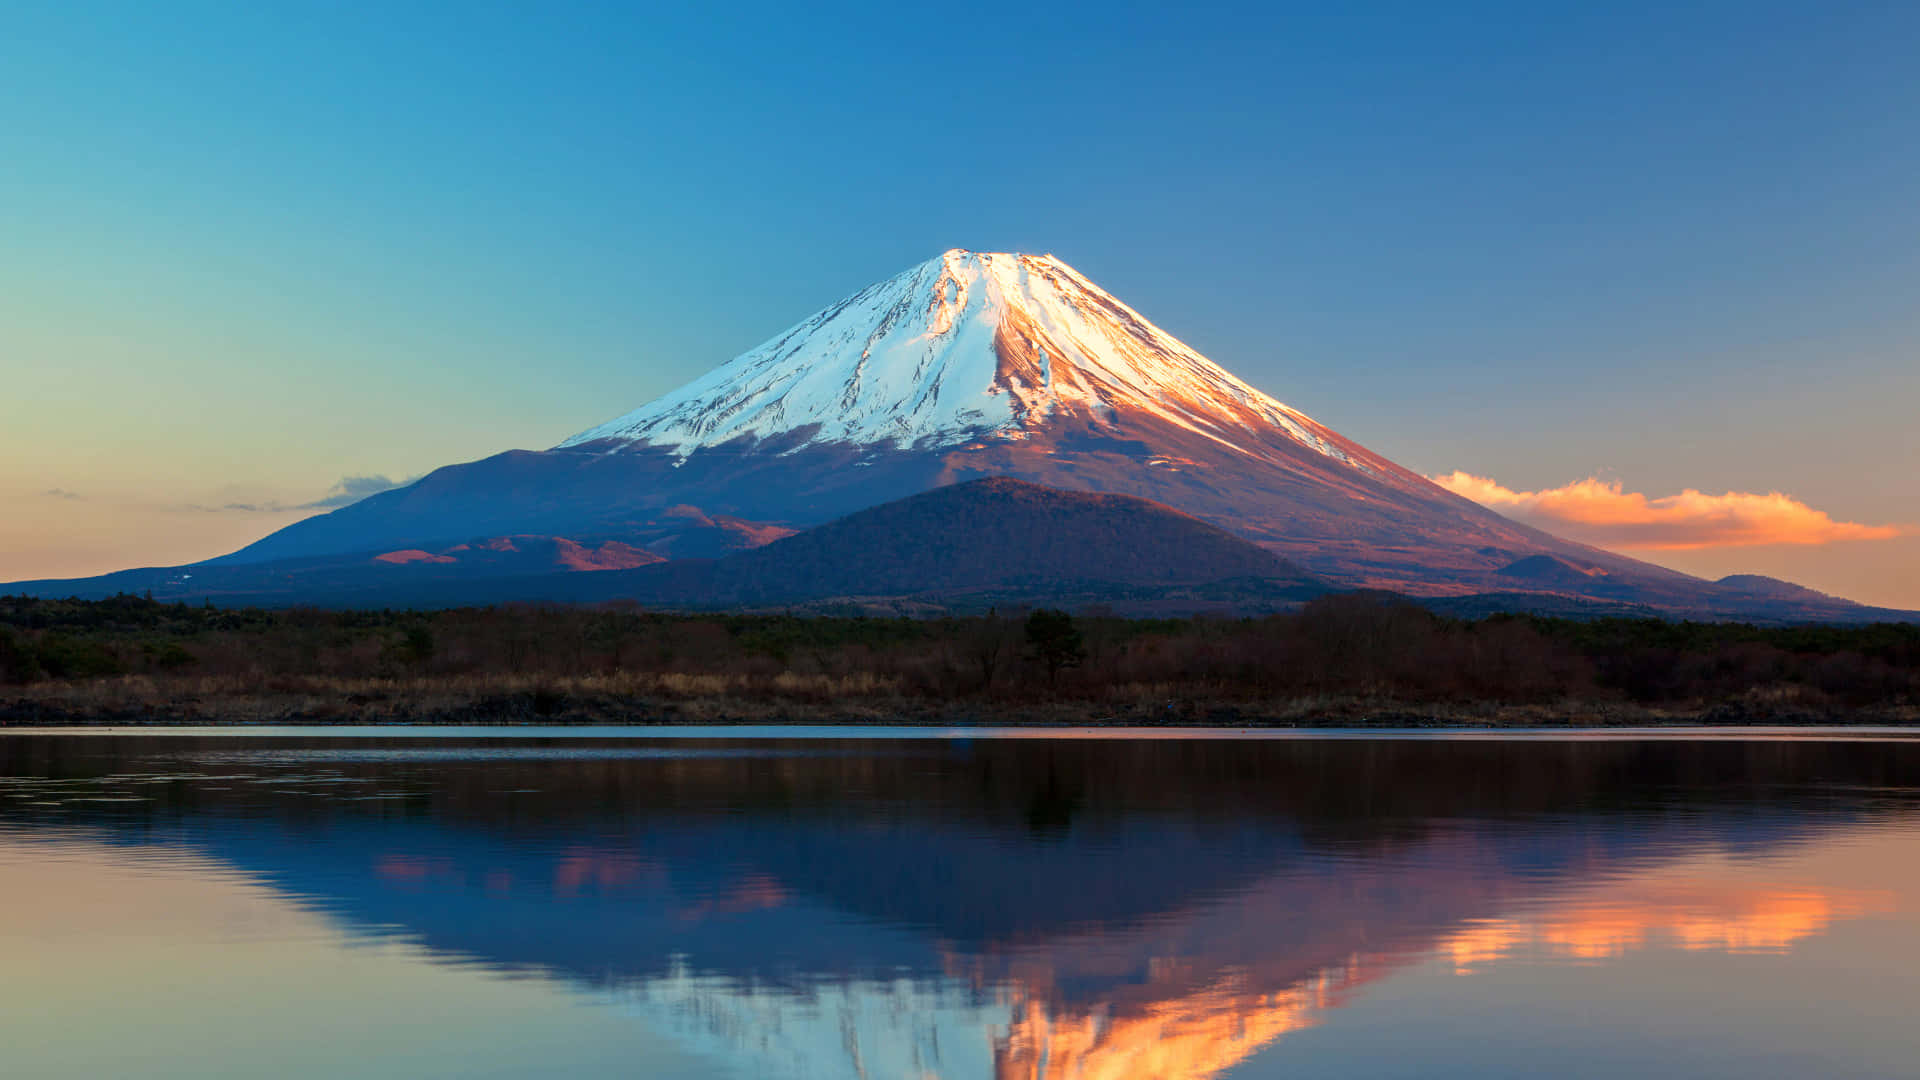 Enjoy Japan's Iconic Mount Fuji in its Natural Beauty.